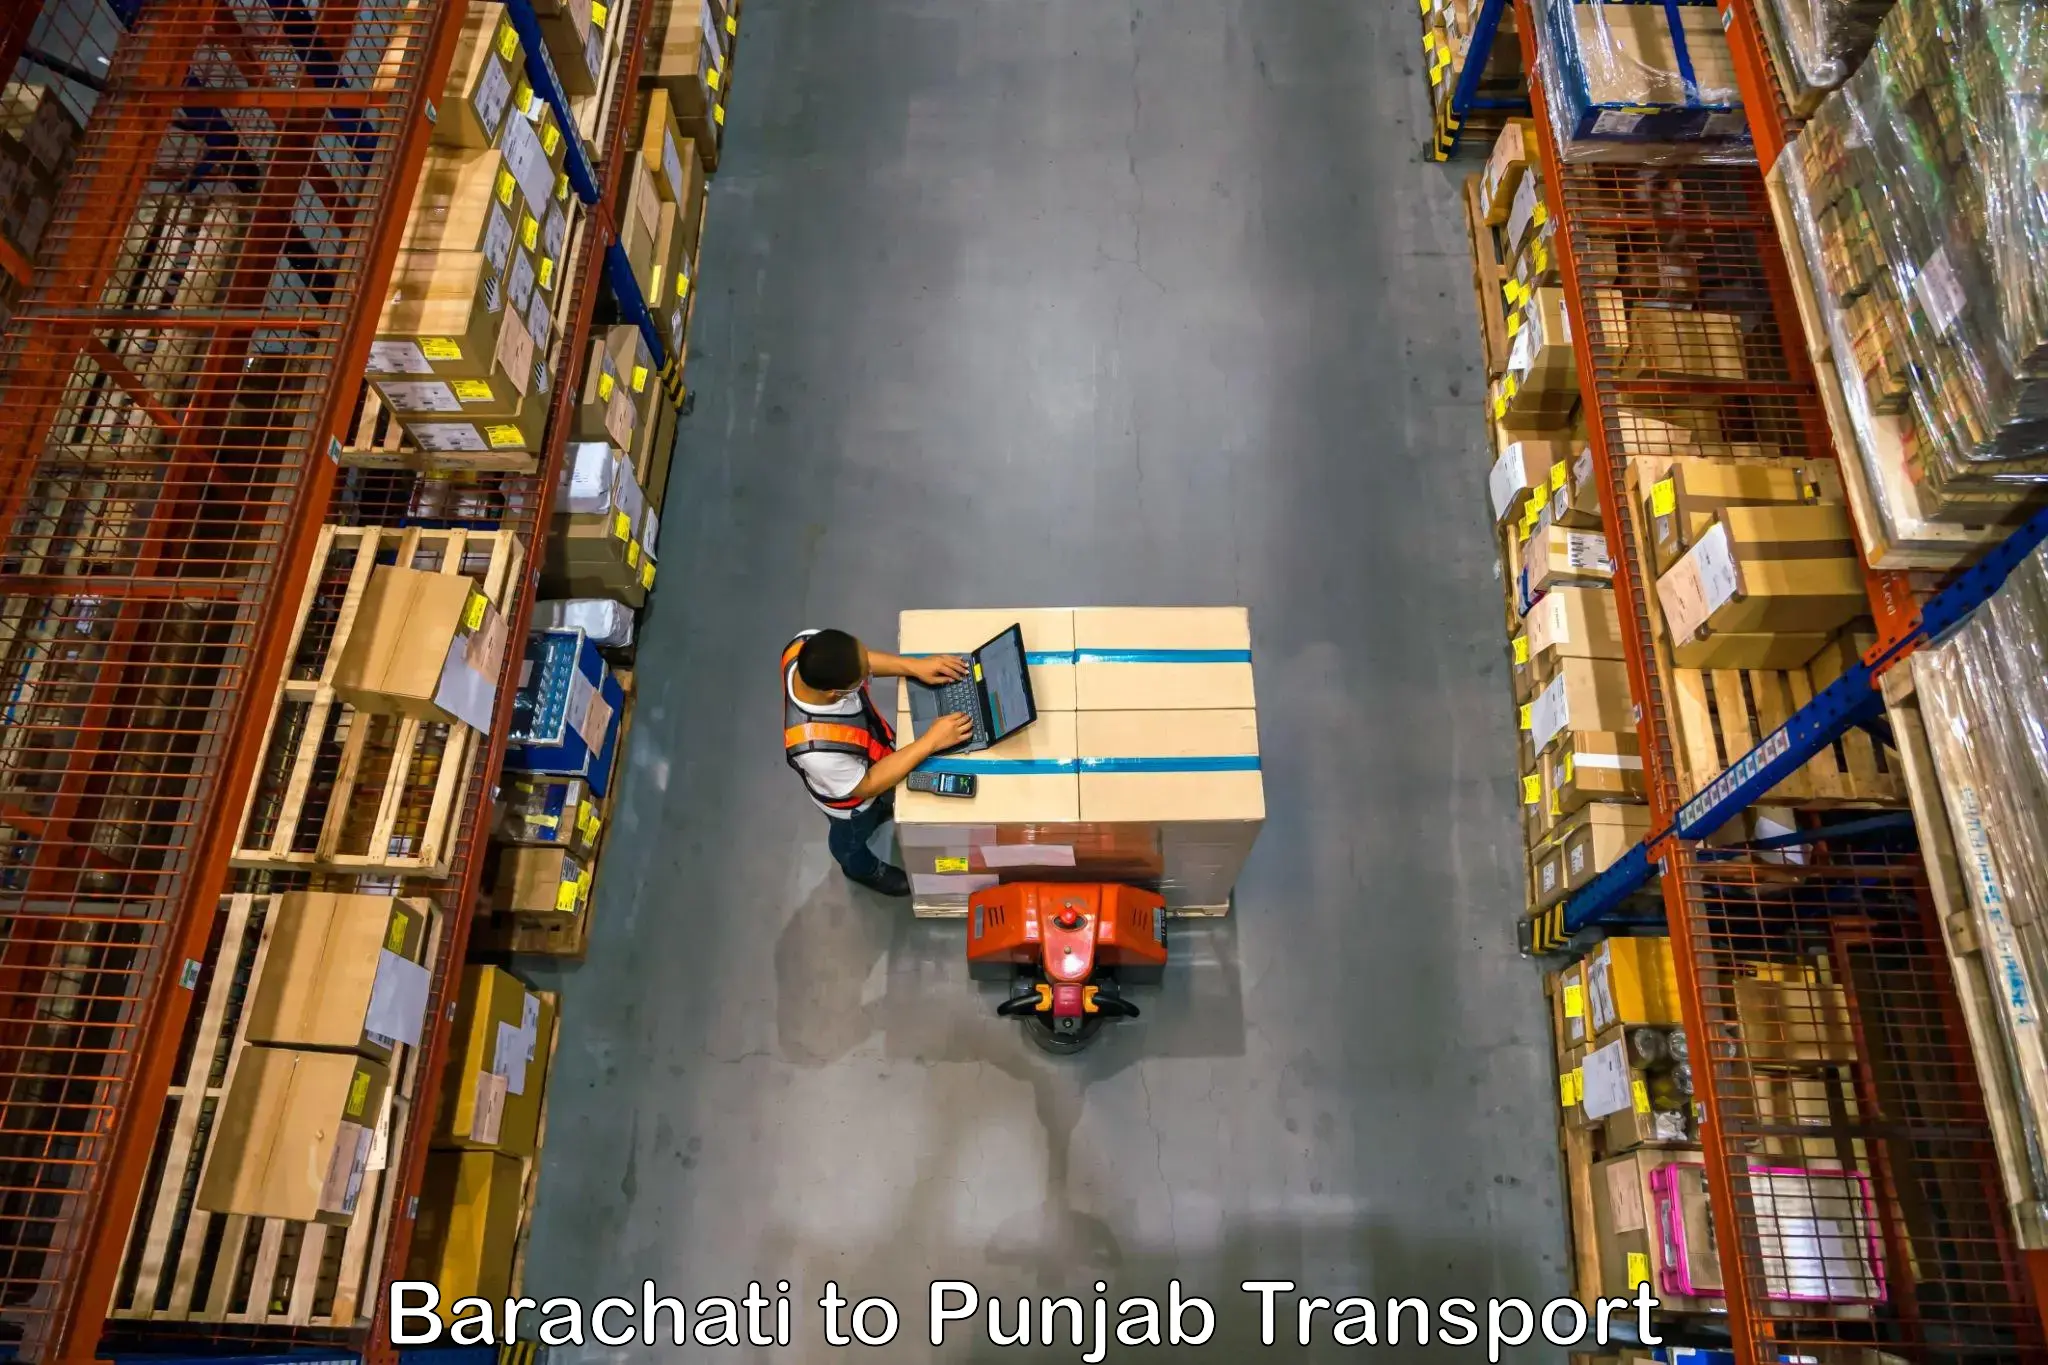 Part load transport service in India Barachati to Zirakpur